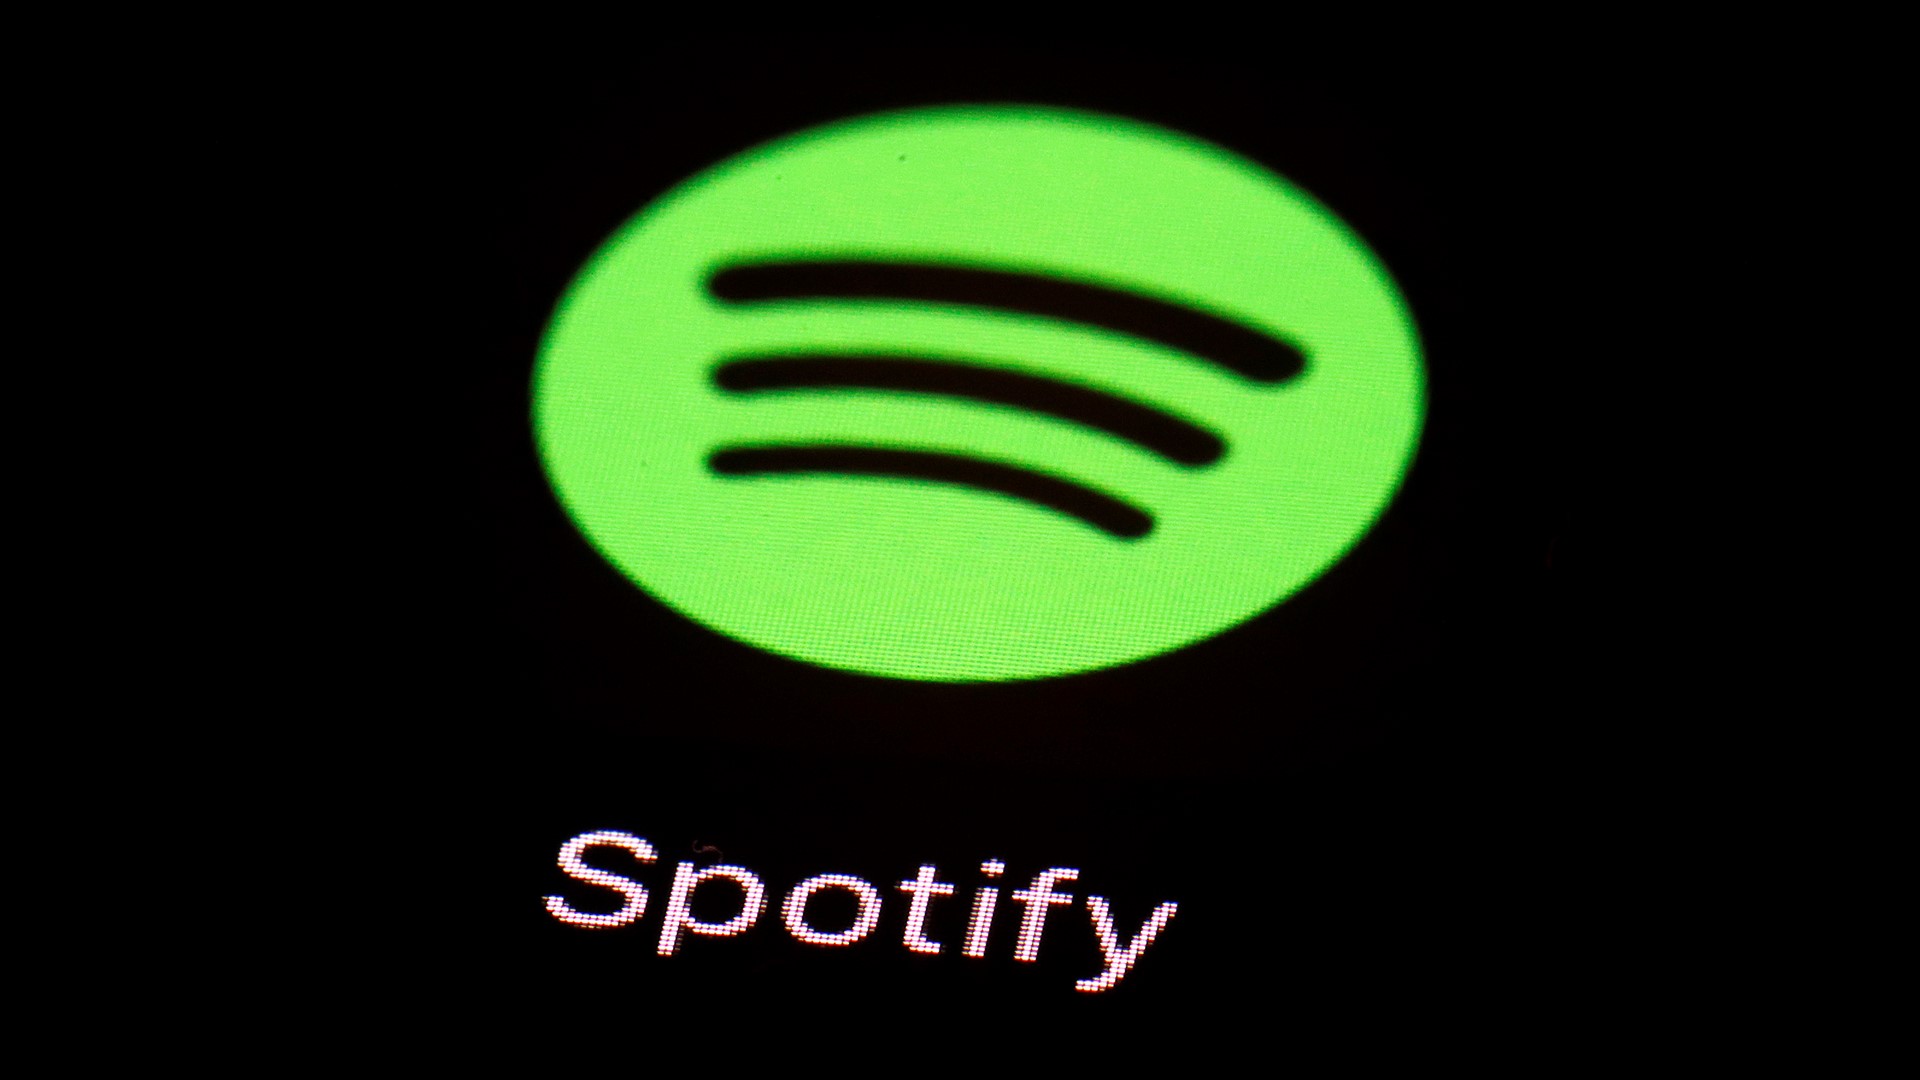 Spotify announces moststreamed artists, songs of 2019 and